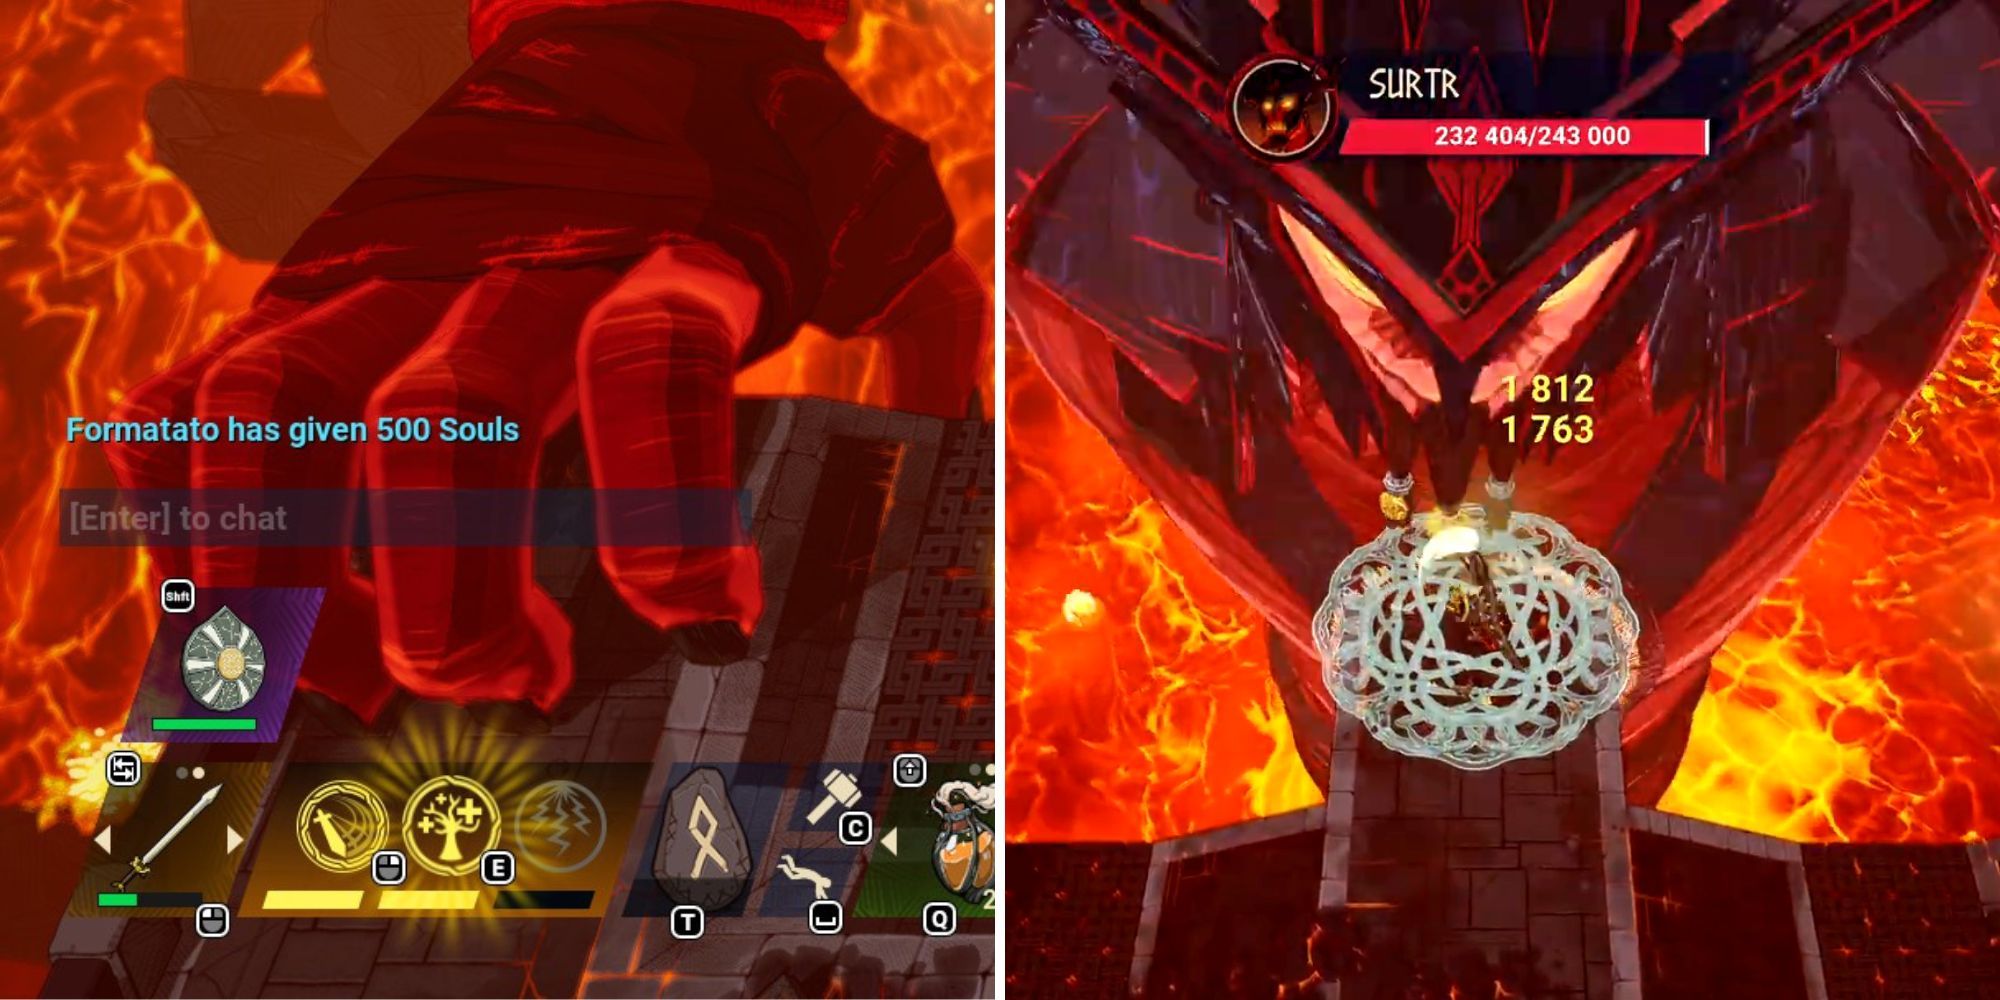 left: healing skill activated on weapon, right: healing seed deploys on ground as player attacks Surtr